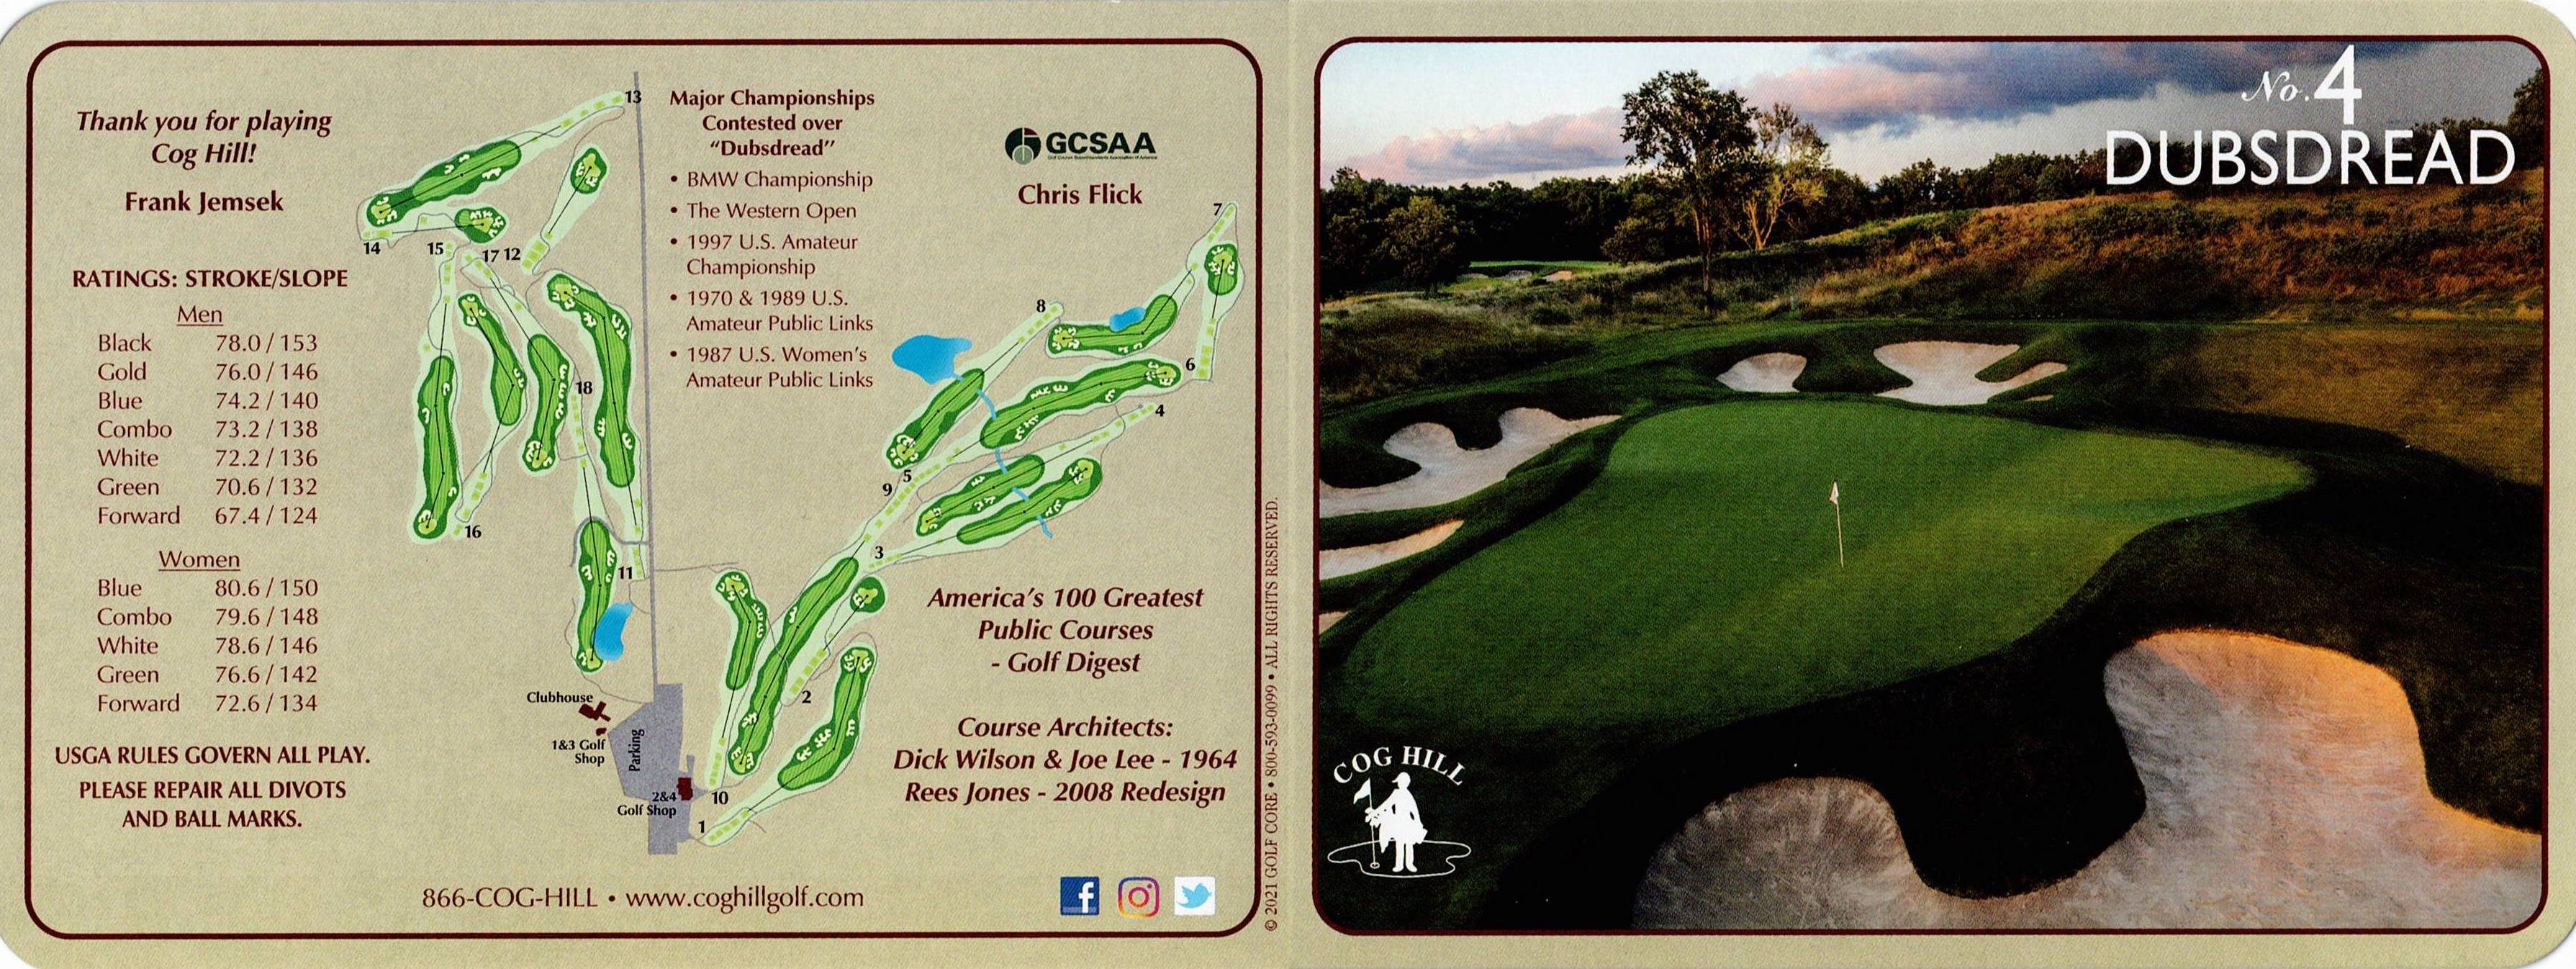 Scan of the scorecard from Cog Hill Course #4 - Dubsdread in Palos Park, Illinois. Dubsdread has 6 tee boxes and a combo, hybrid tee box that alternates between the blue and white tees. Note the insane 78.0 rating and 153 slope from the black tees.